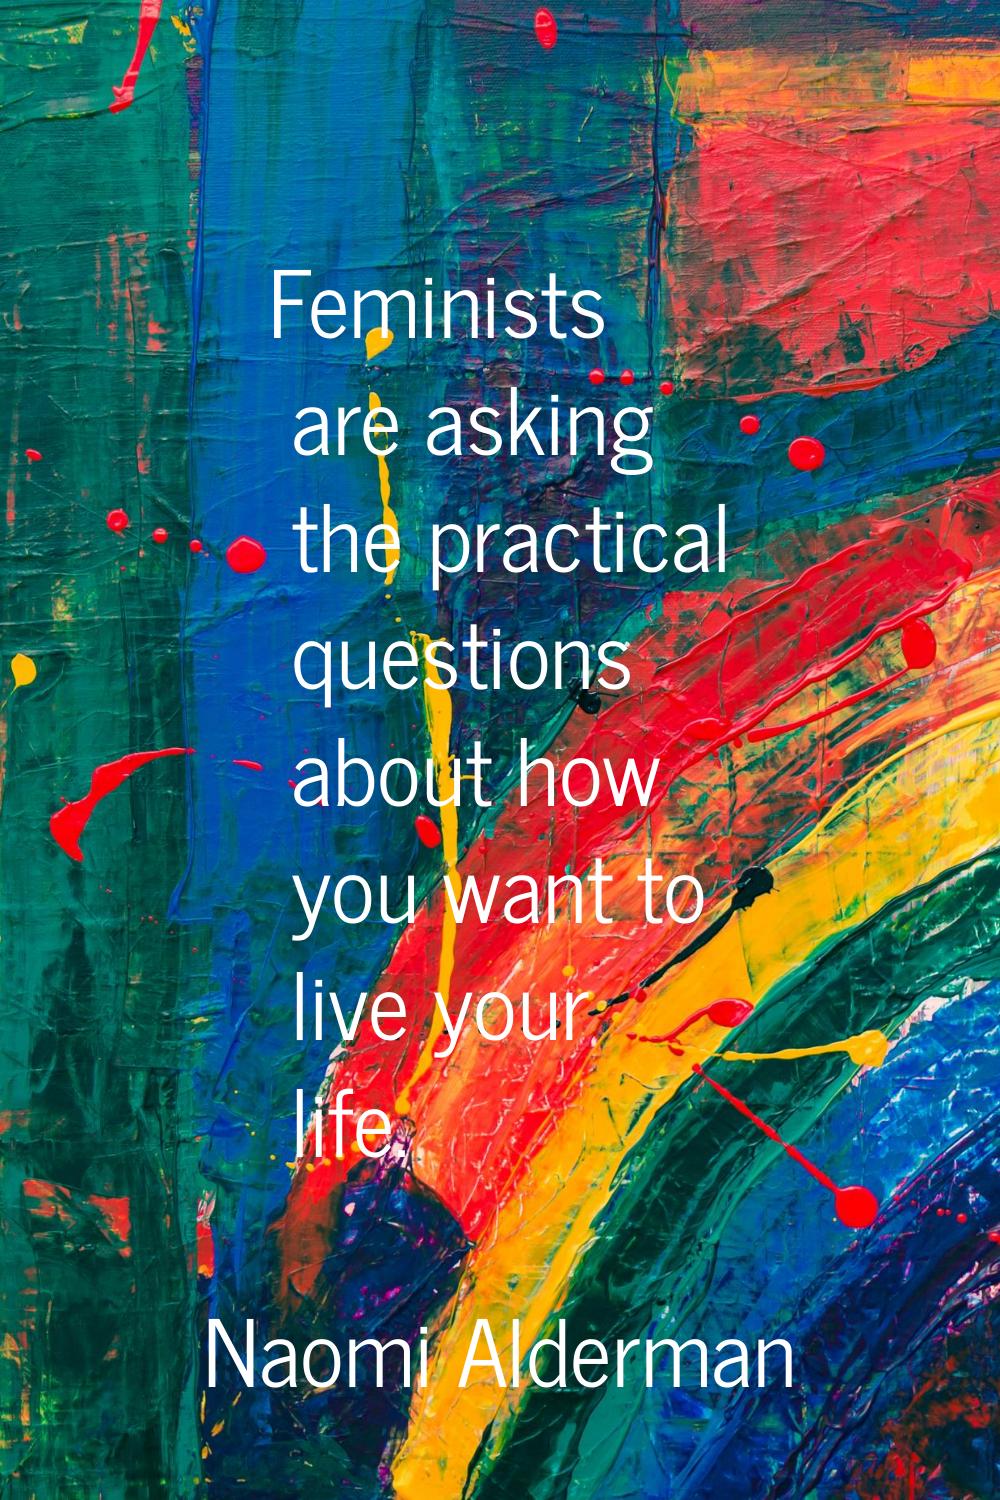 Feminists are asking the practical questions about how you want to live your life.